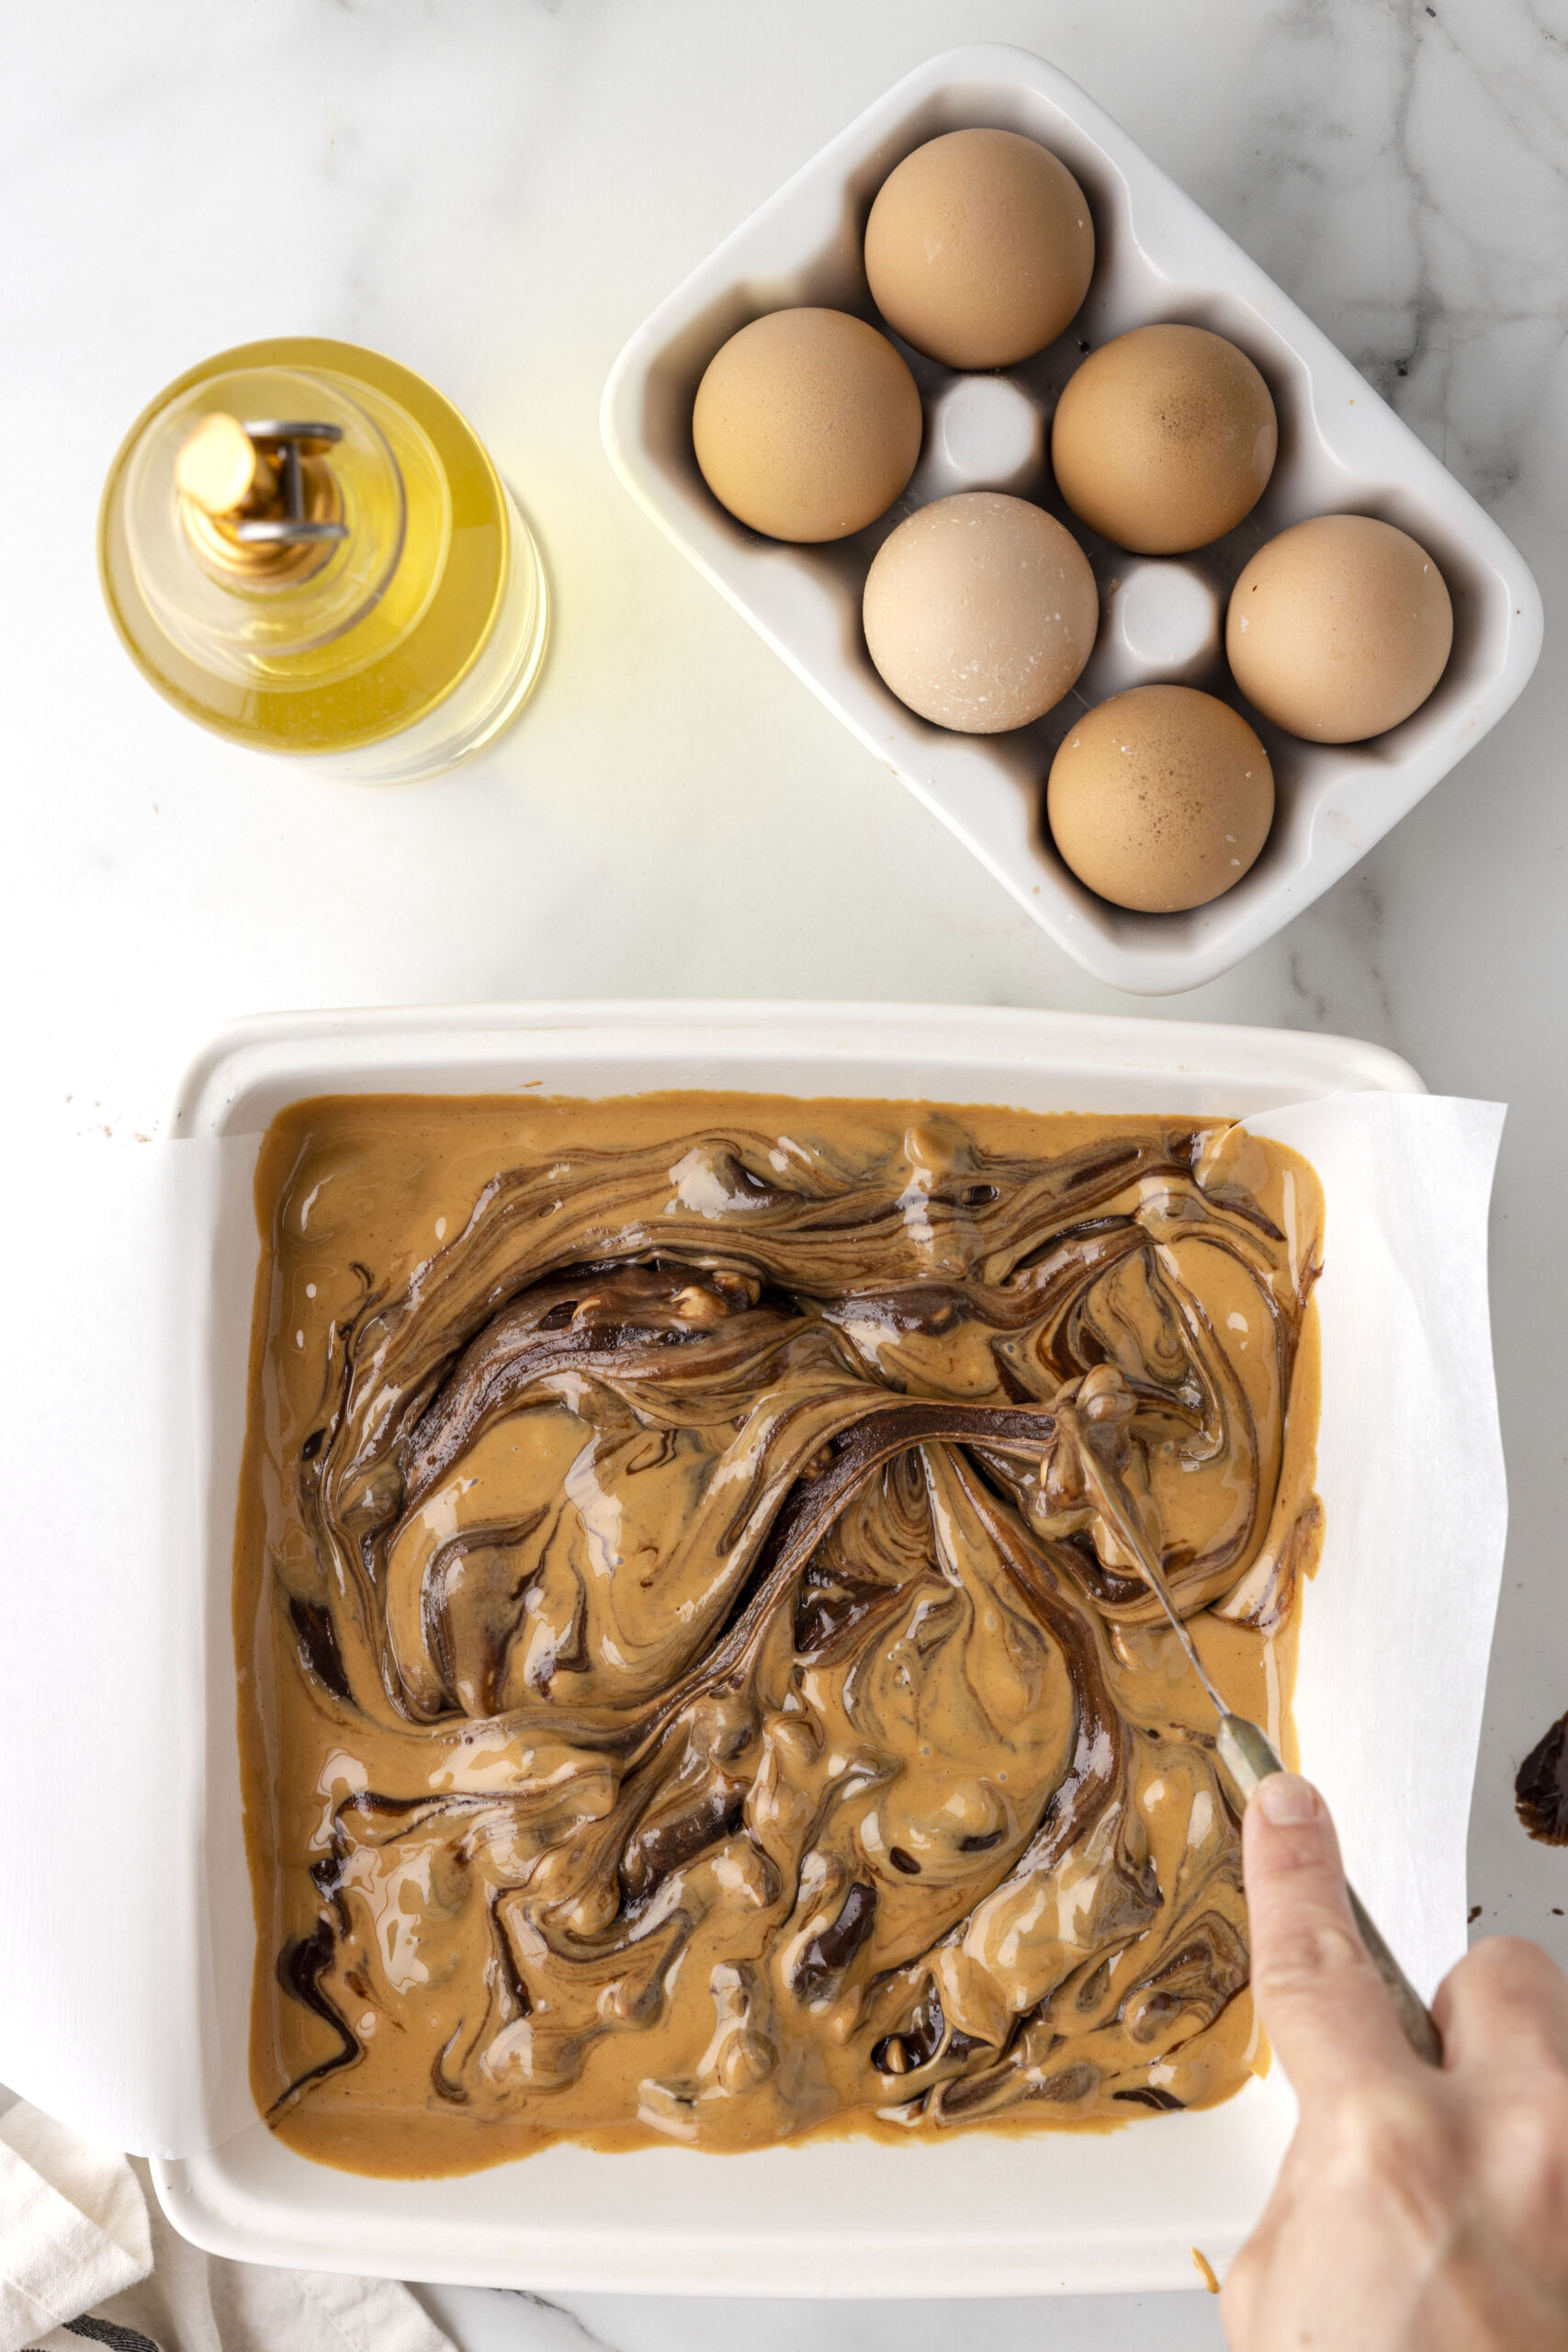 baking dish with swirled peanut butter brownie mix batter. eggs and oil nearby.